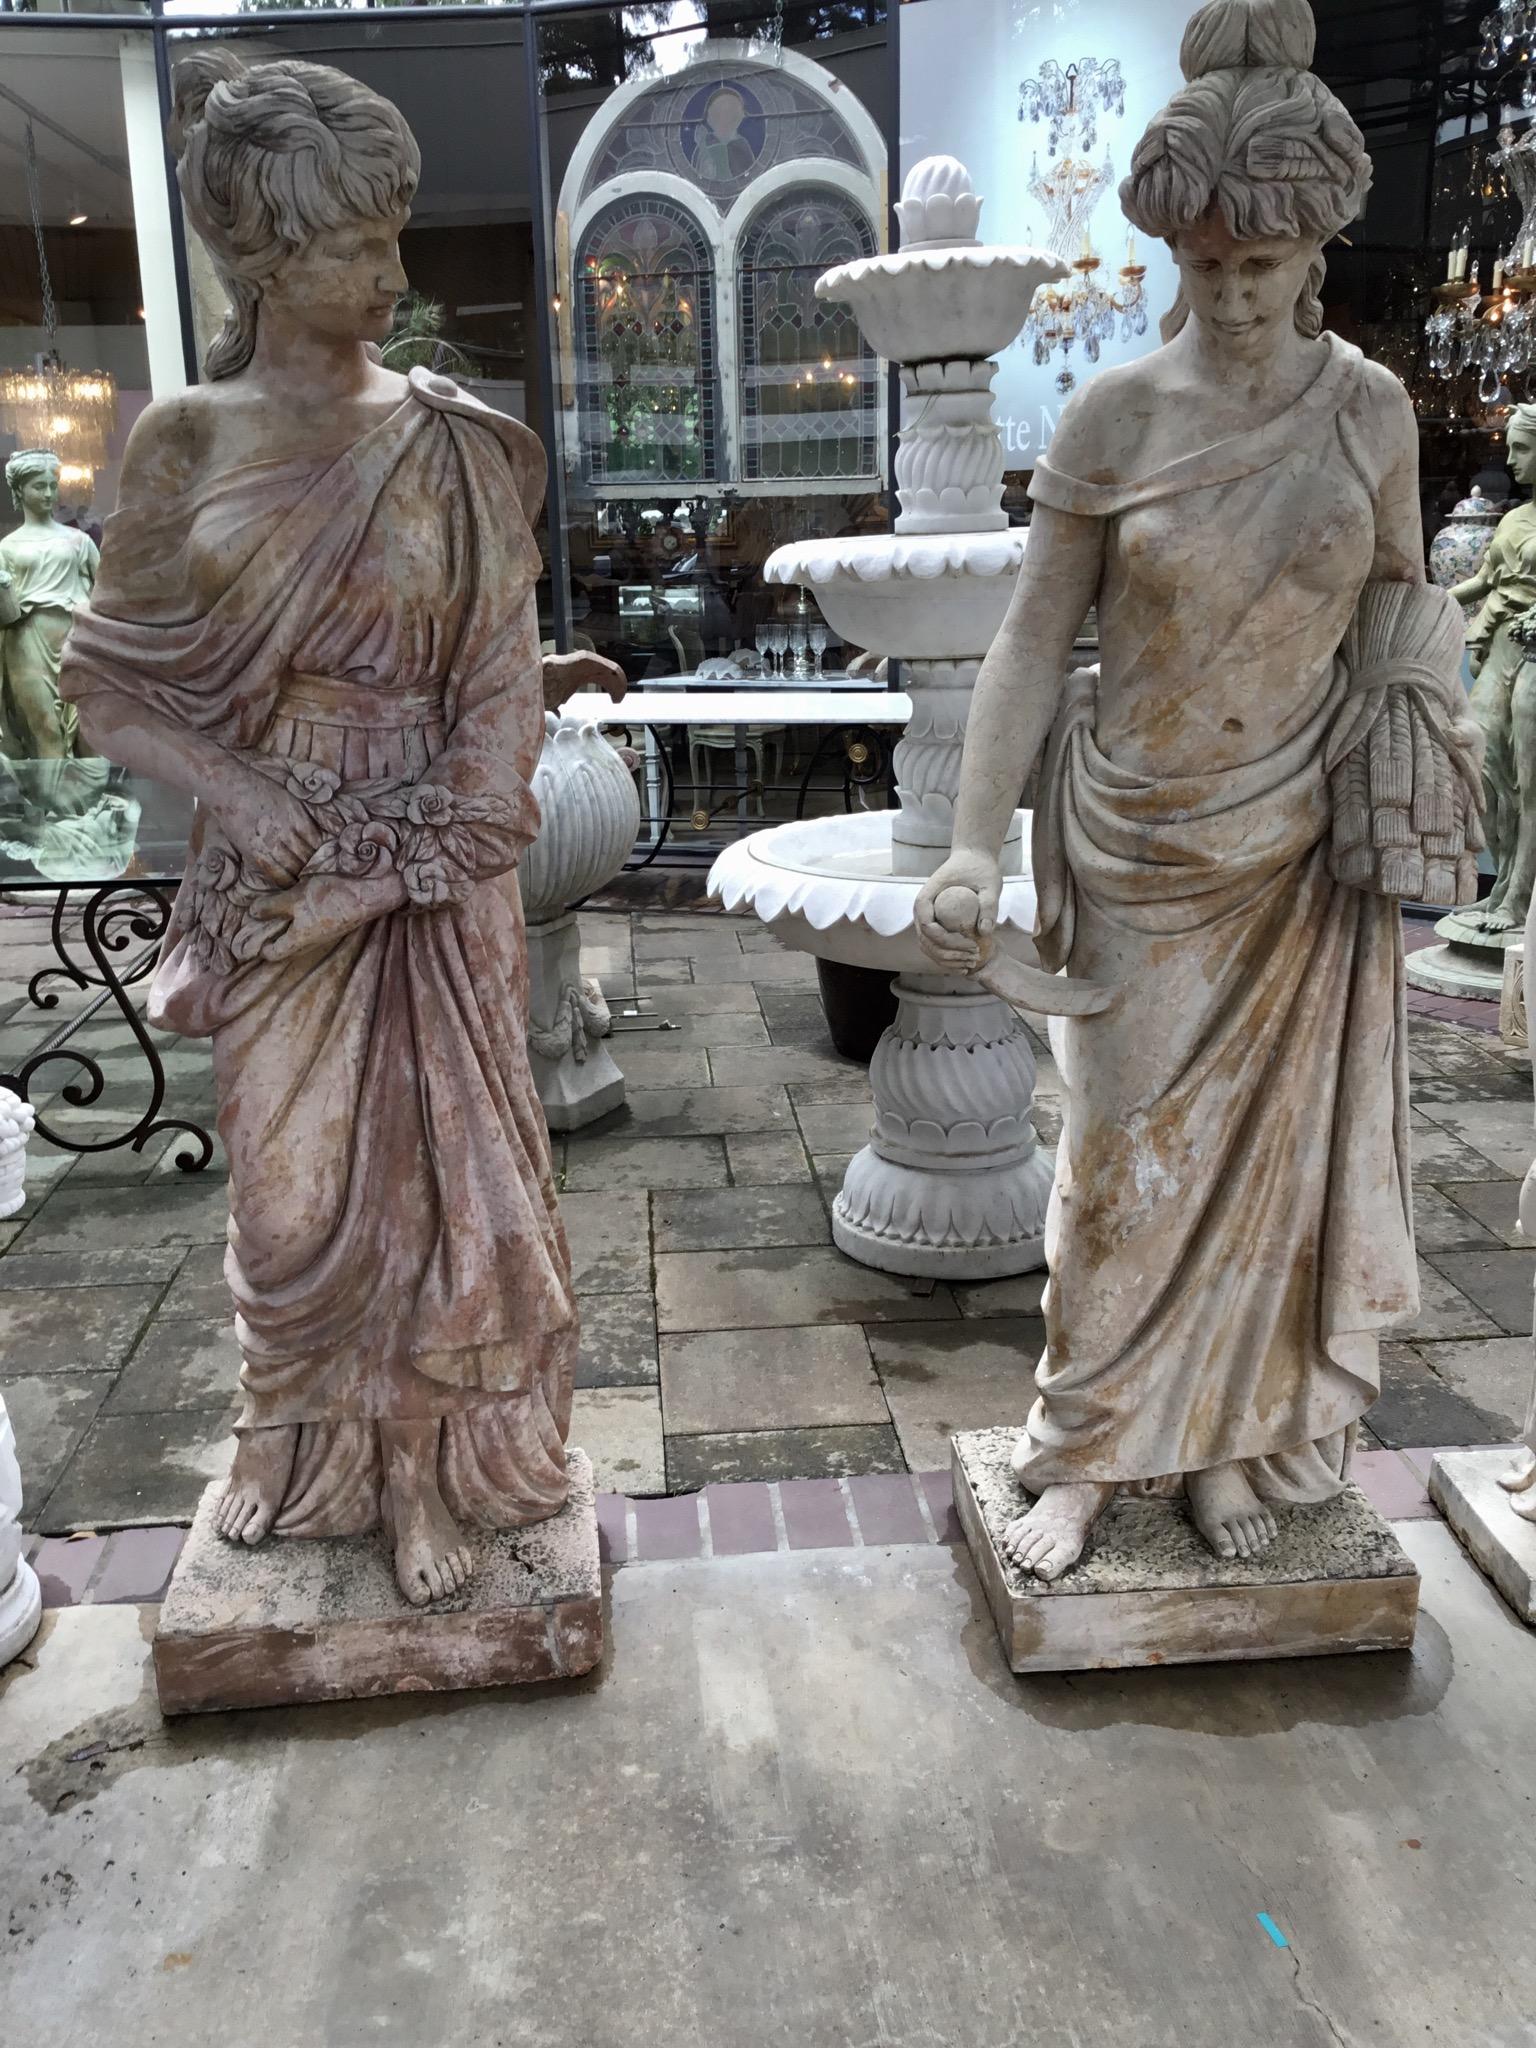 Vintage set of four large marble statues that have been hand carved in
Sienna marble after the original set at the Trevi fountain in Rome. Each
Statue represents a different season and each of the statues hold items that represent the seasons. The